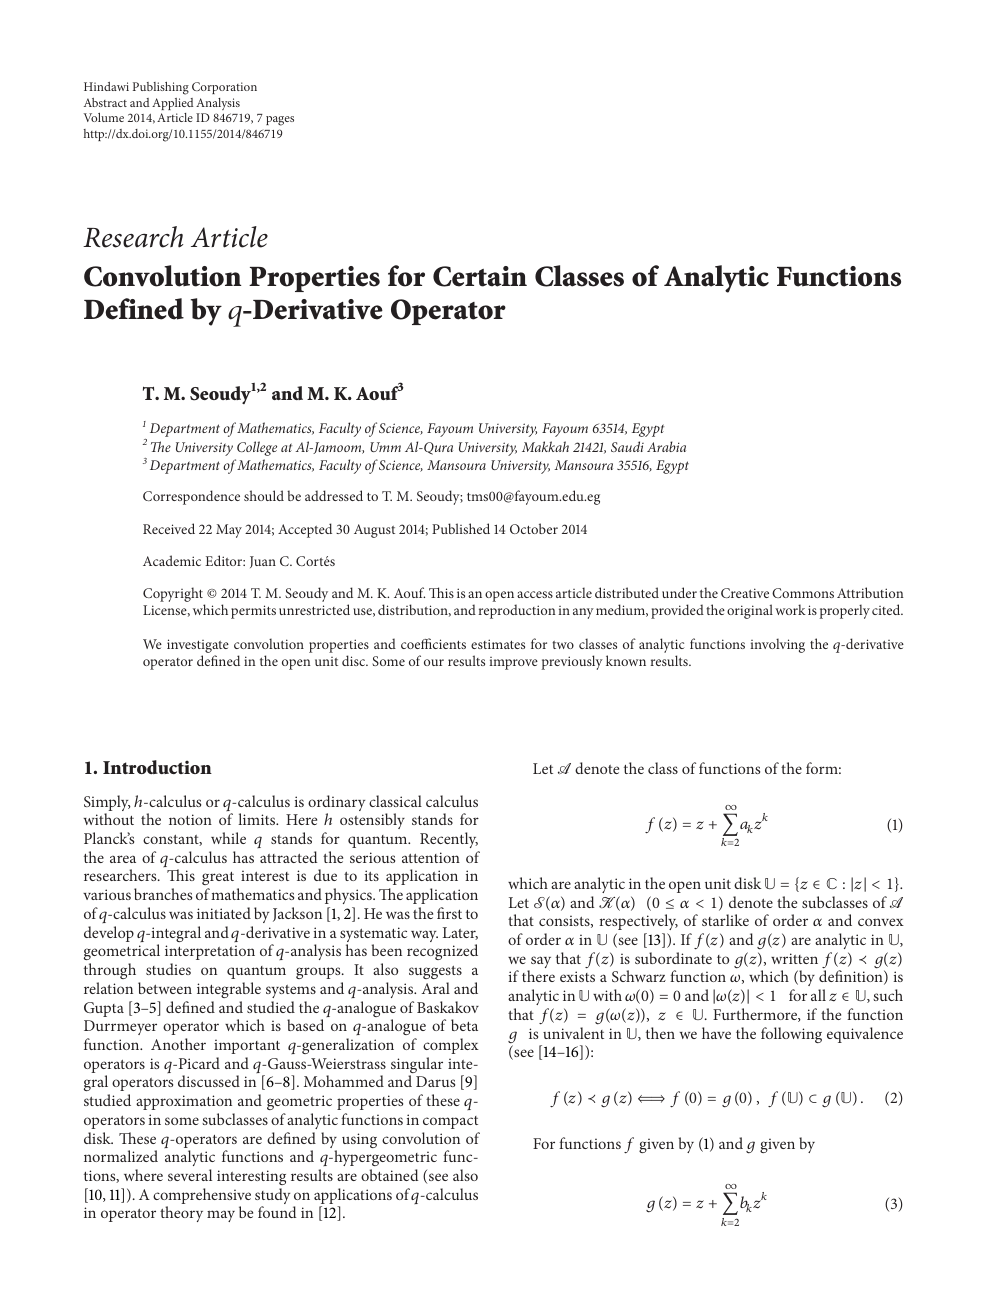 Convolution Properties For Certain Classes Of Analytic Functions Defined By Q Derivative Operator Topic Of Research Paper In Mathematics Download Scholarly Article Pdf And Read For Free On Cyberleninka Open Science